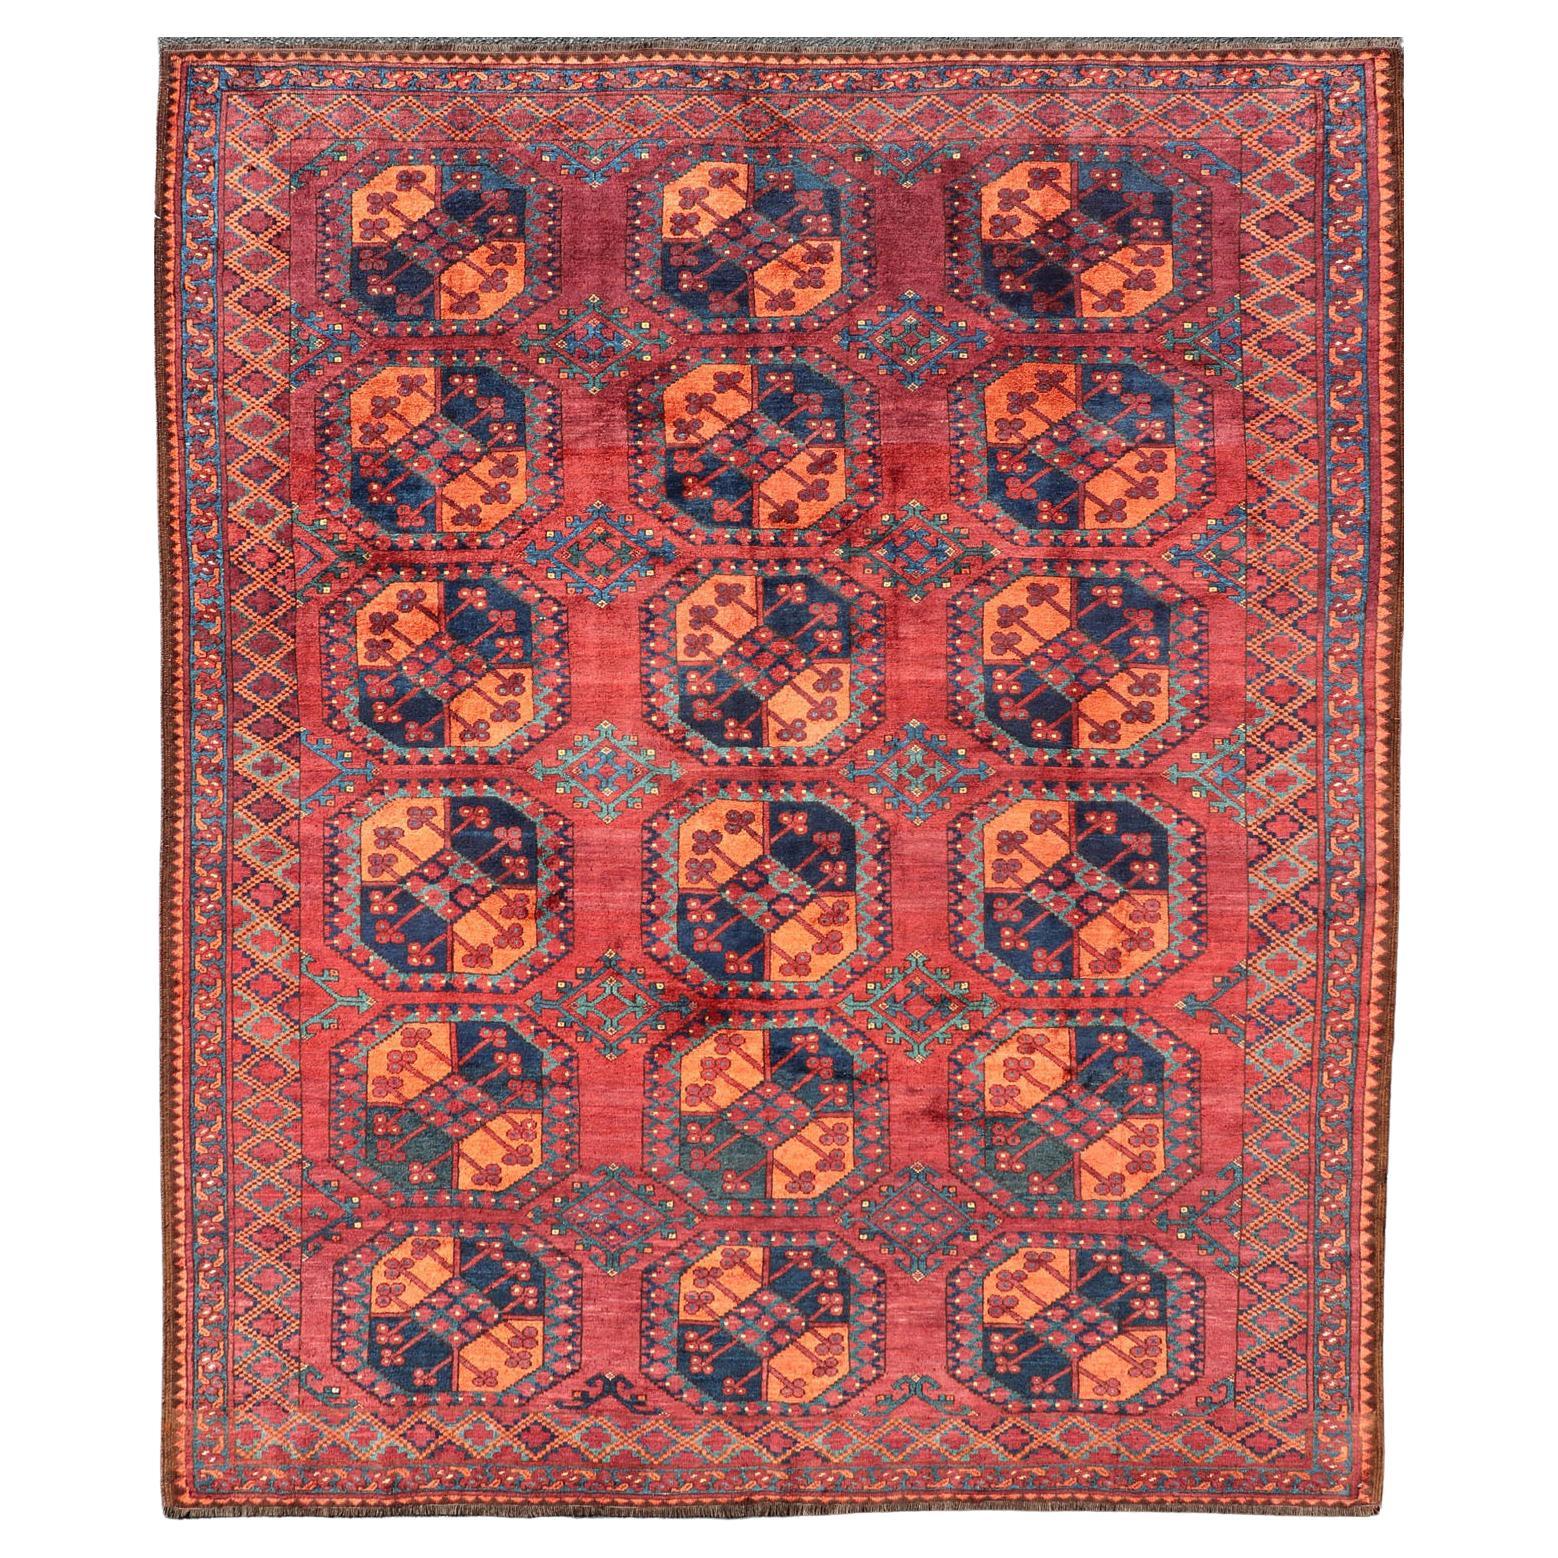 Square Sized Hand-Knotted Turkomen Ersari Rug in Wool with Repeating Gul Design For Sale